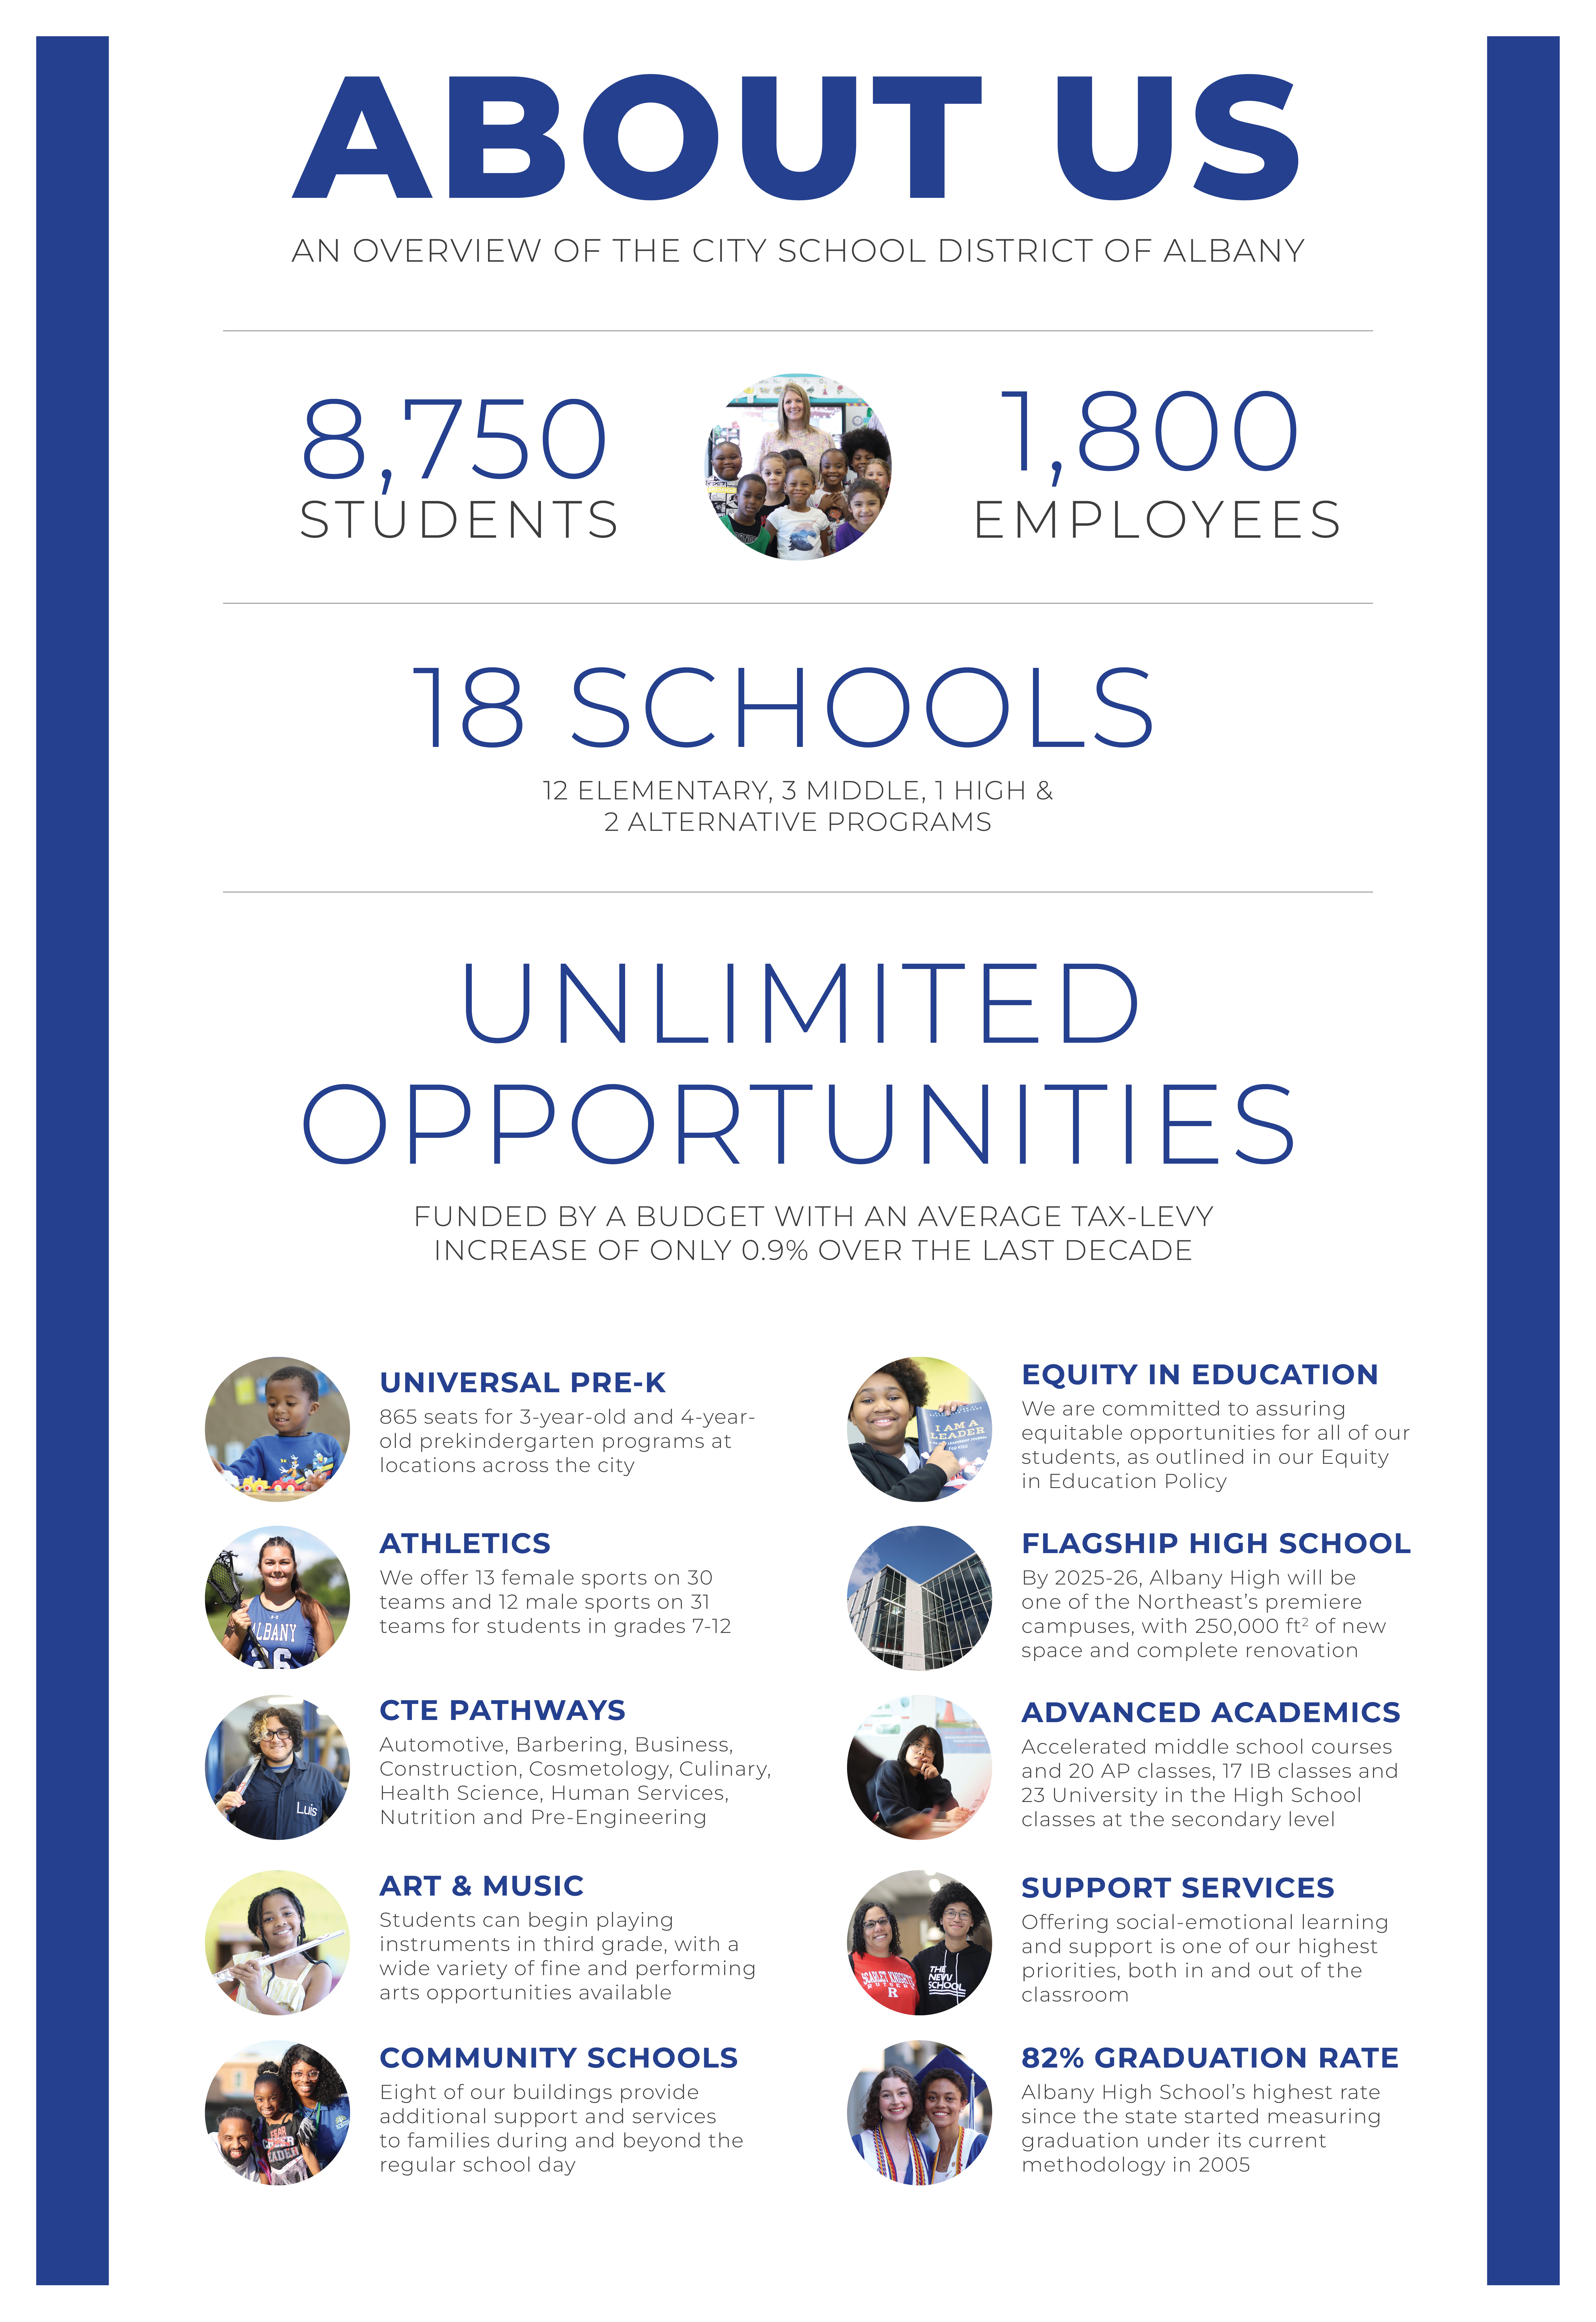 Infographic containing information about our district